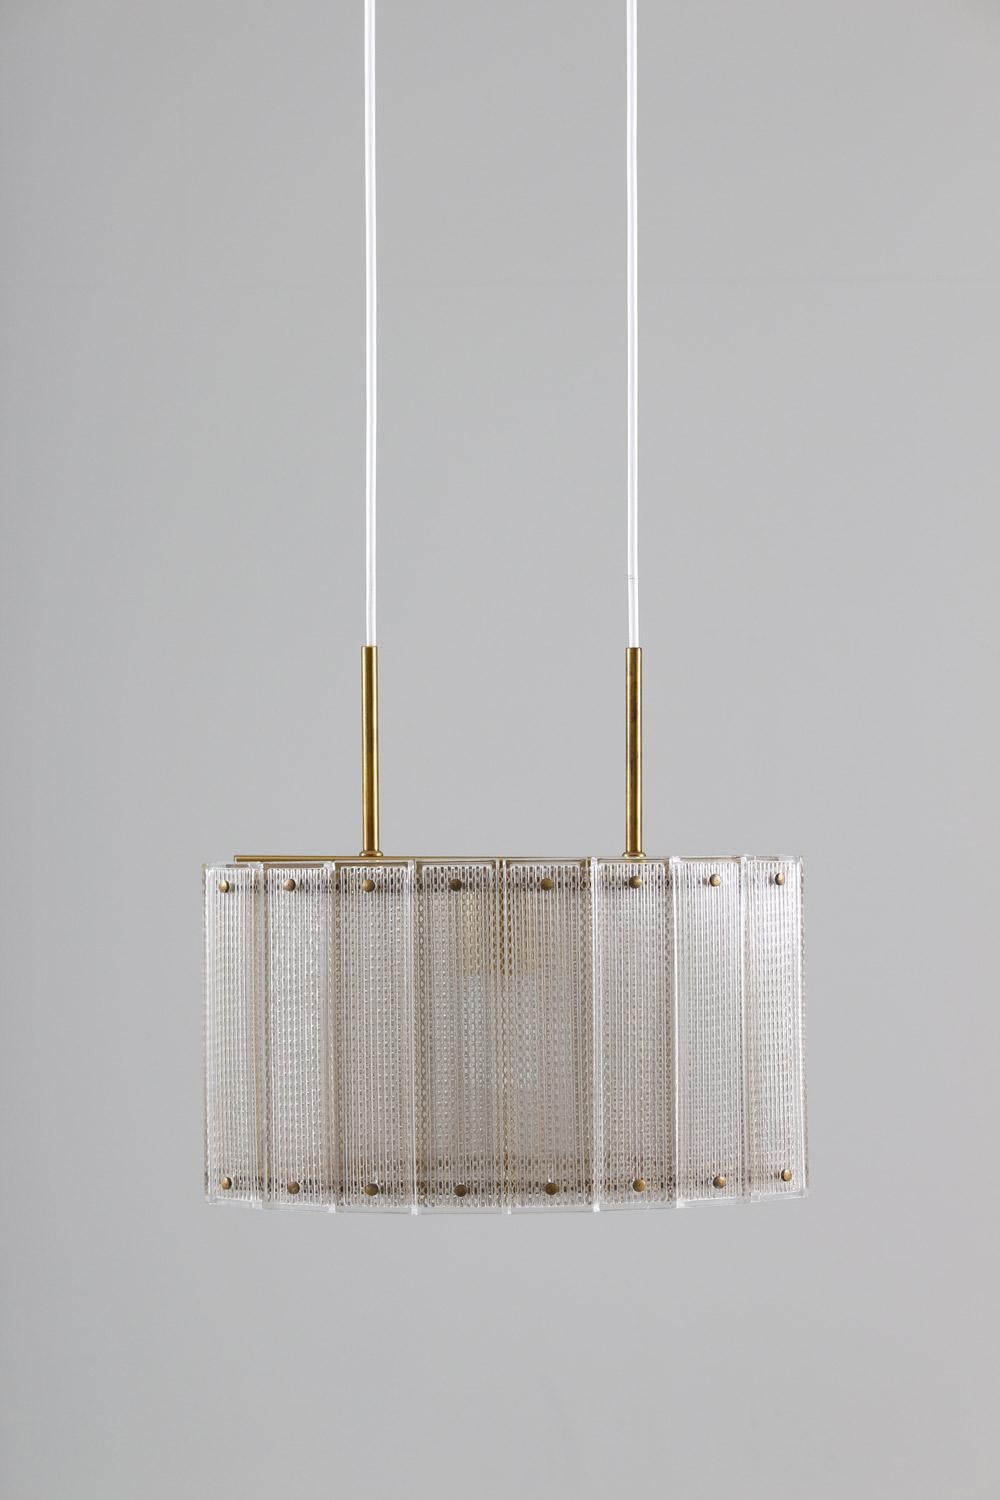 A high-quality pendant produced by Falkenbergs, Sweden. 
The construction of this lamp is very minimalistic and elegant. Two brass rings hold a perforated metal cylinder, which is surrounded by glass blocks that are held in place by brass screws to